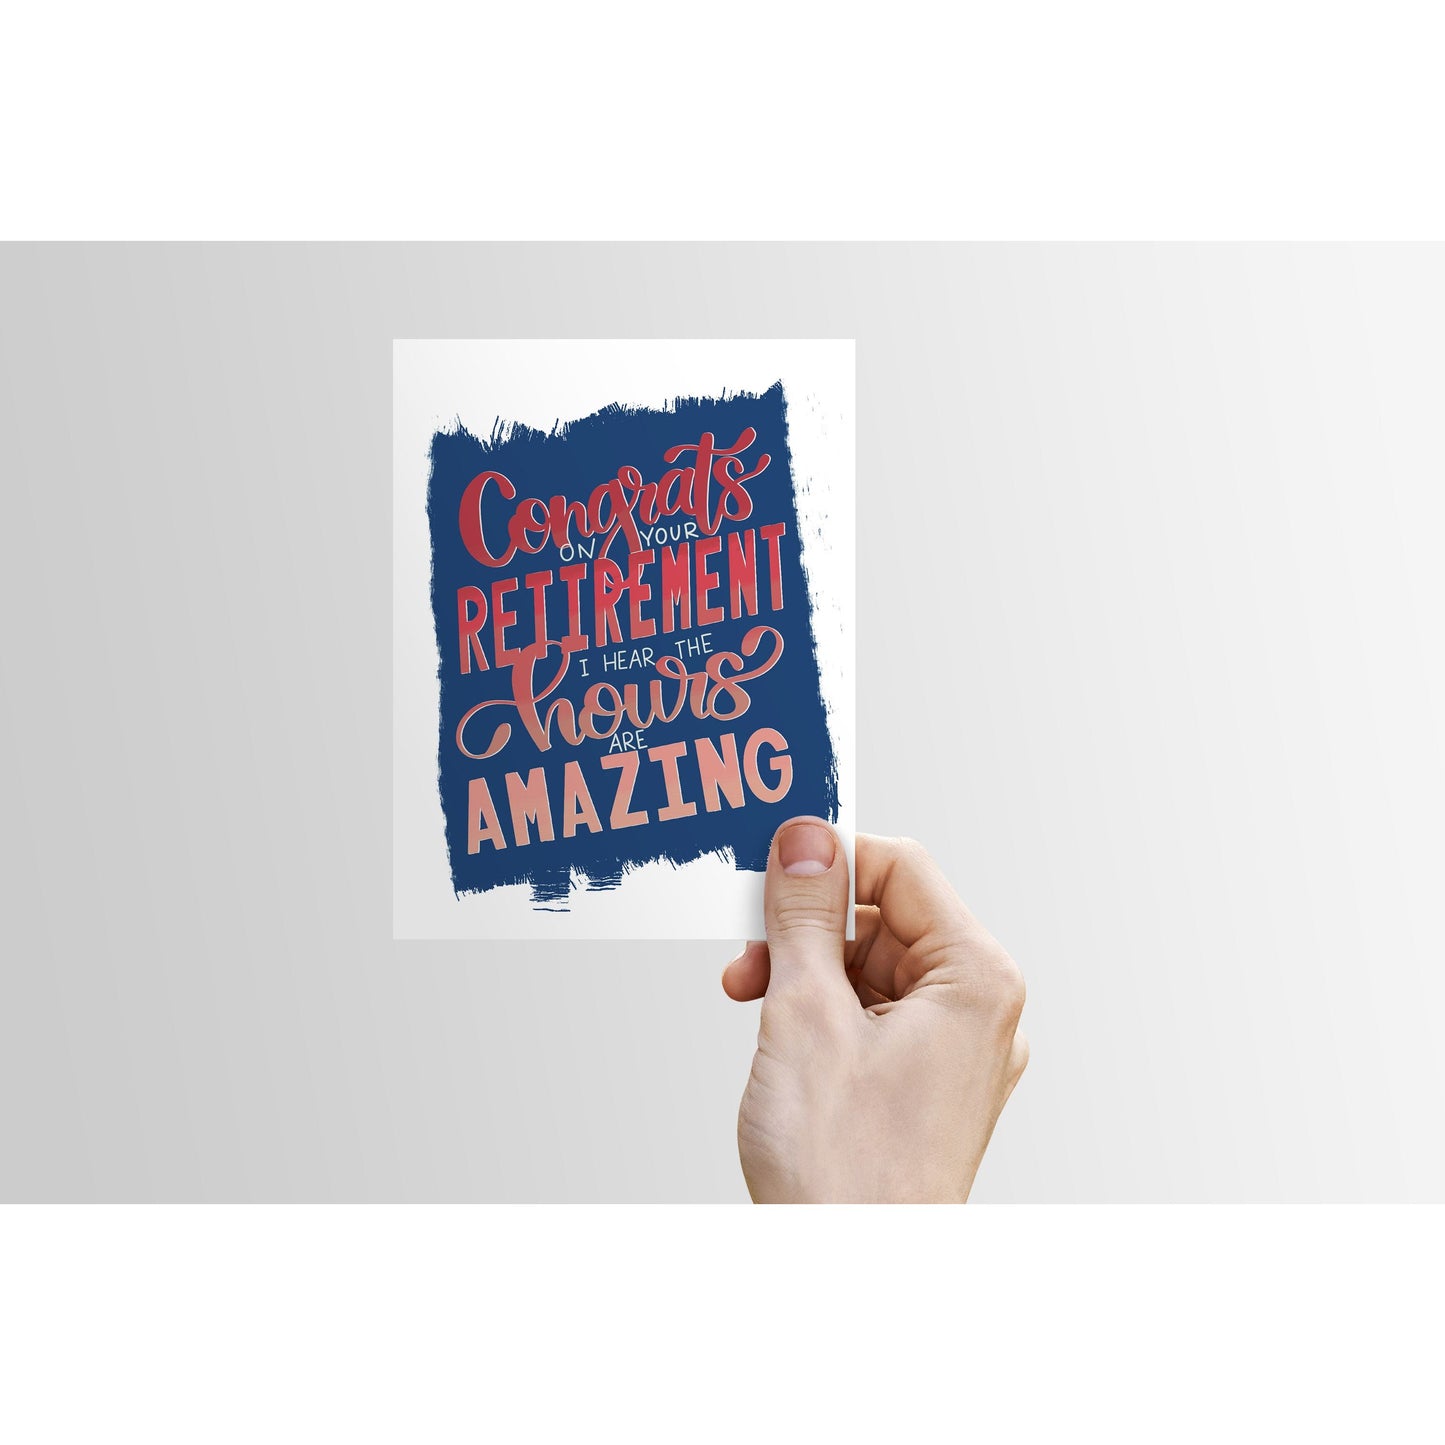 Congrats on Your Retirement - Greeting Card | funny card, retiring, congratulations